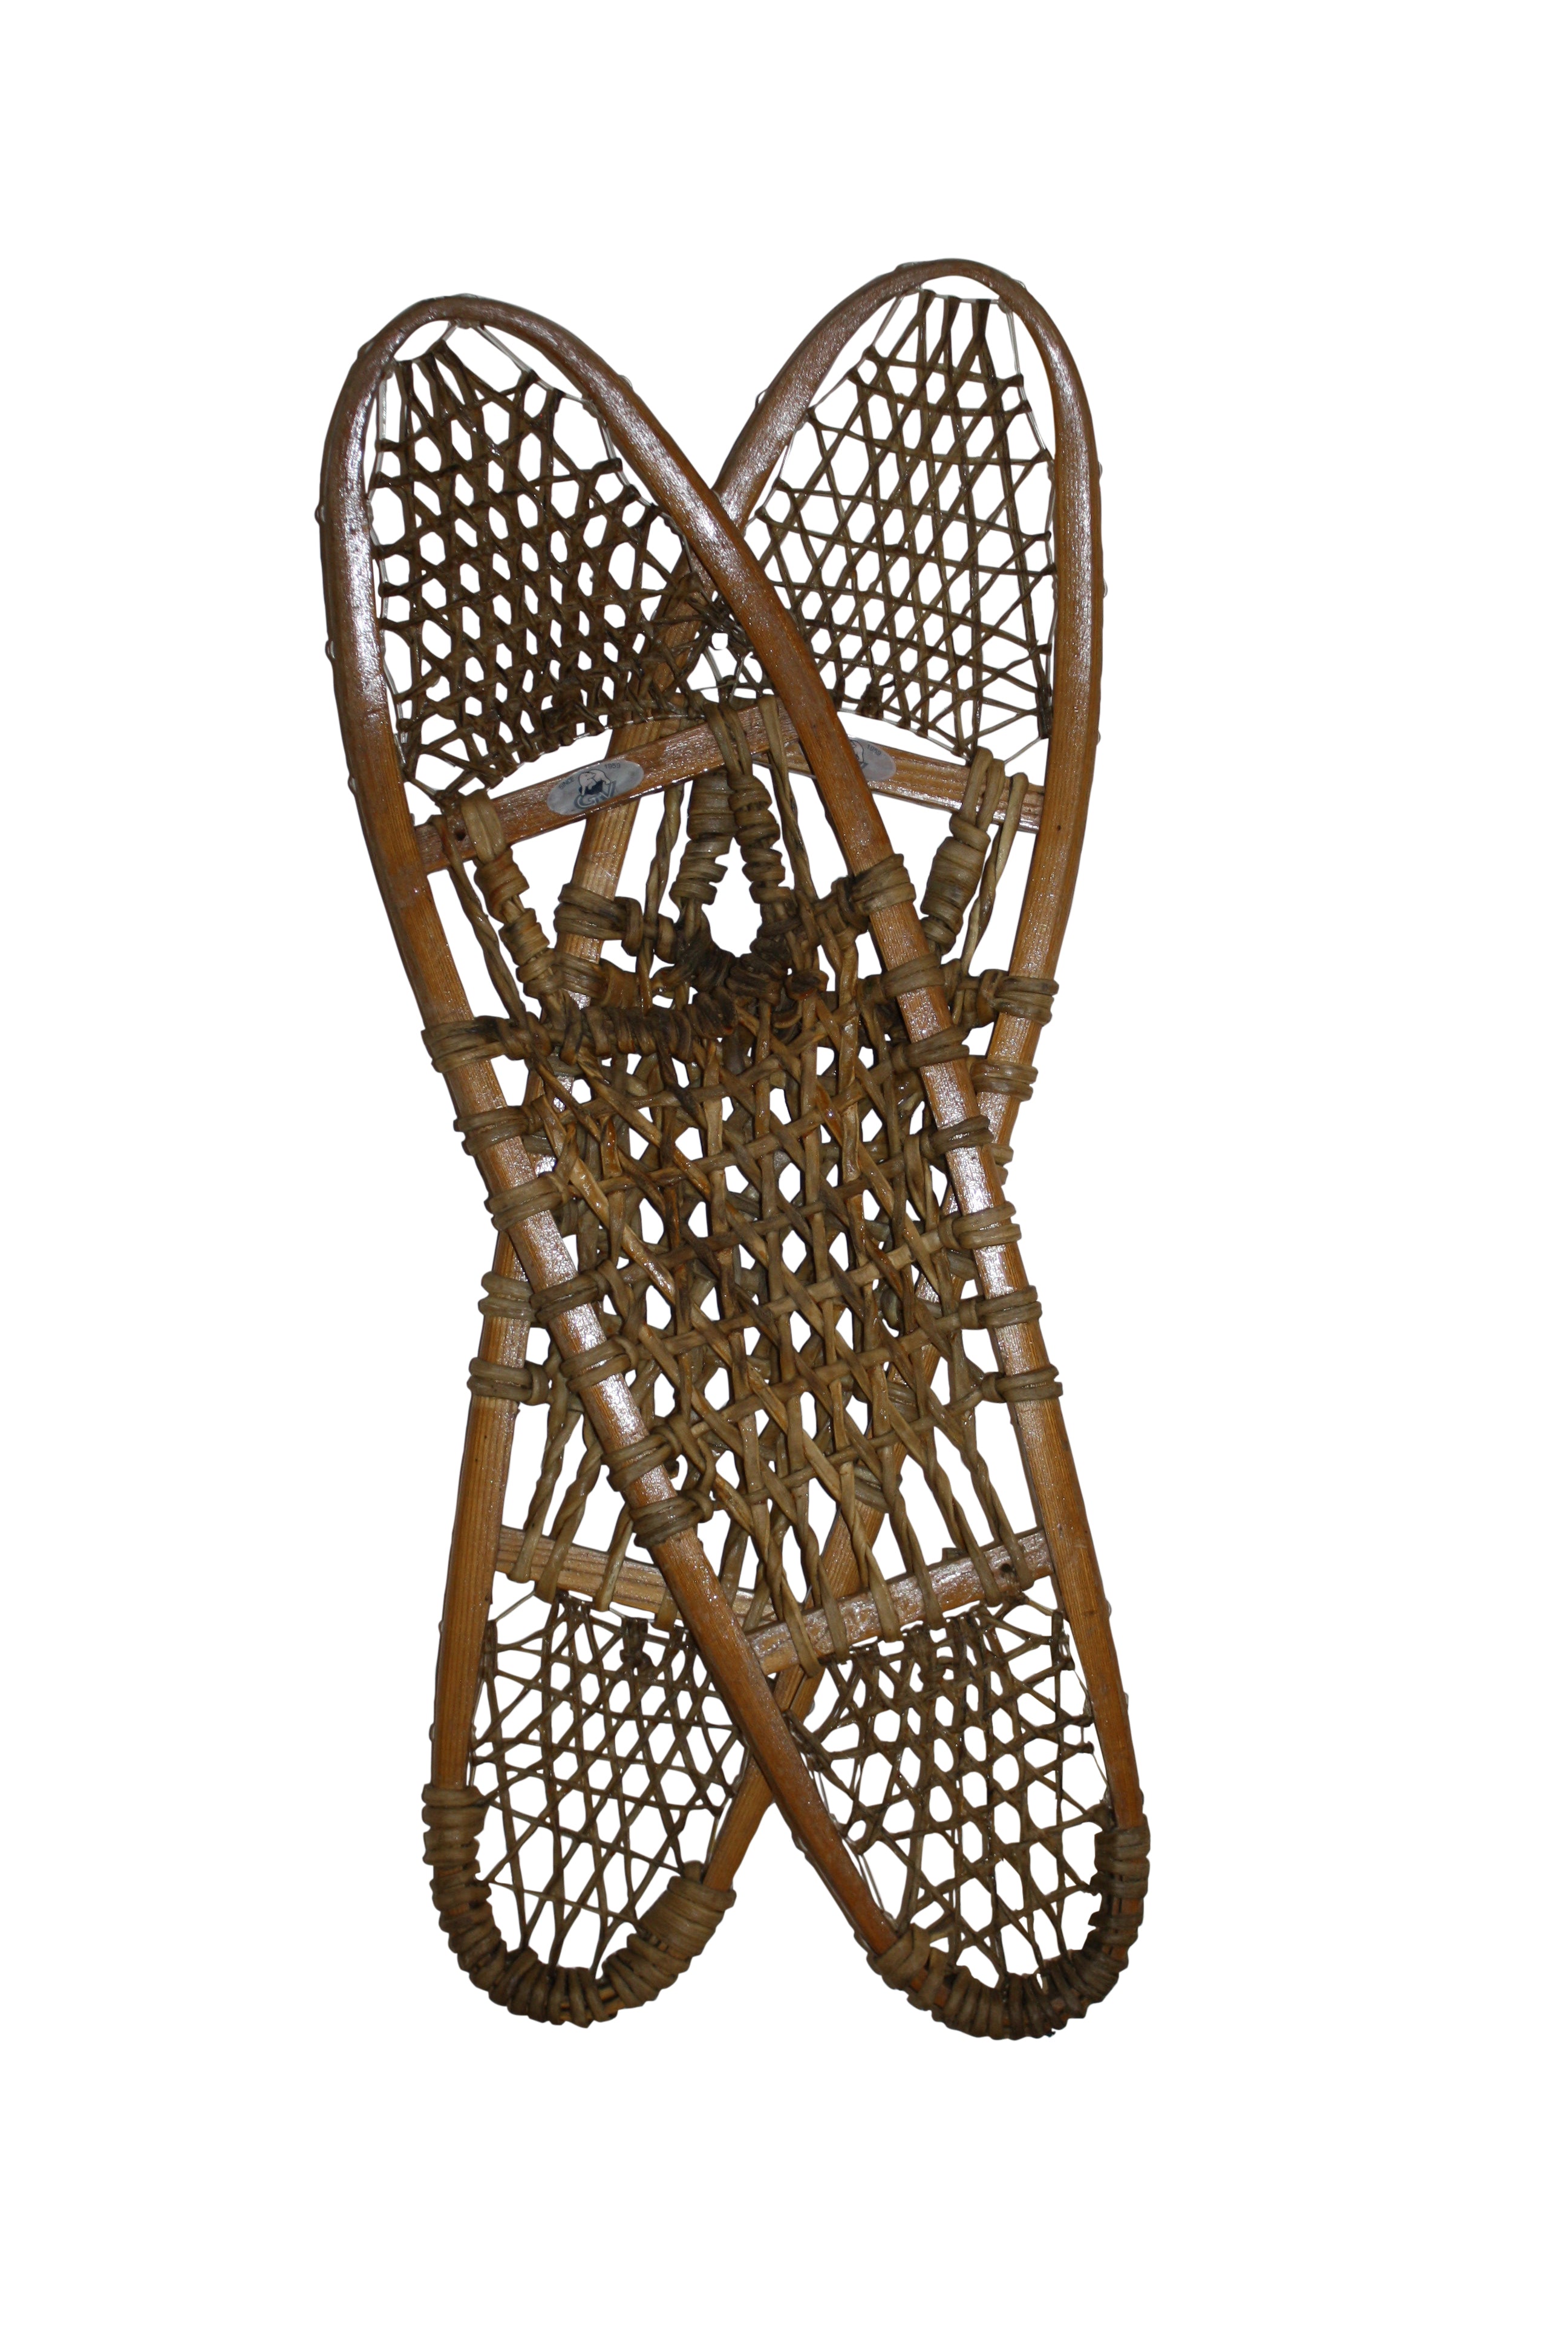 Canadian GV Snowshoes